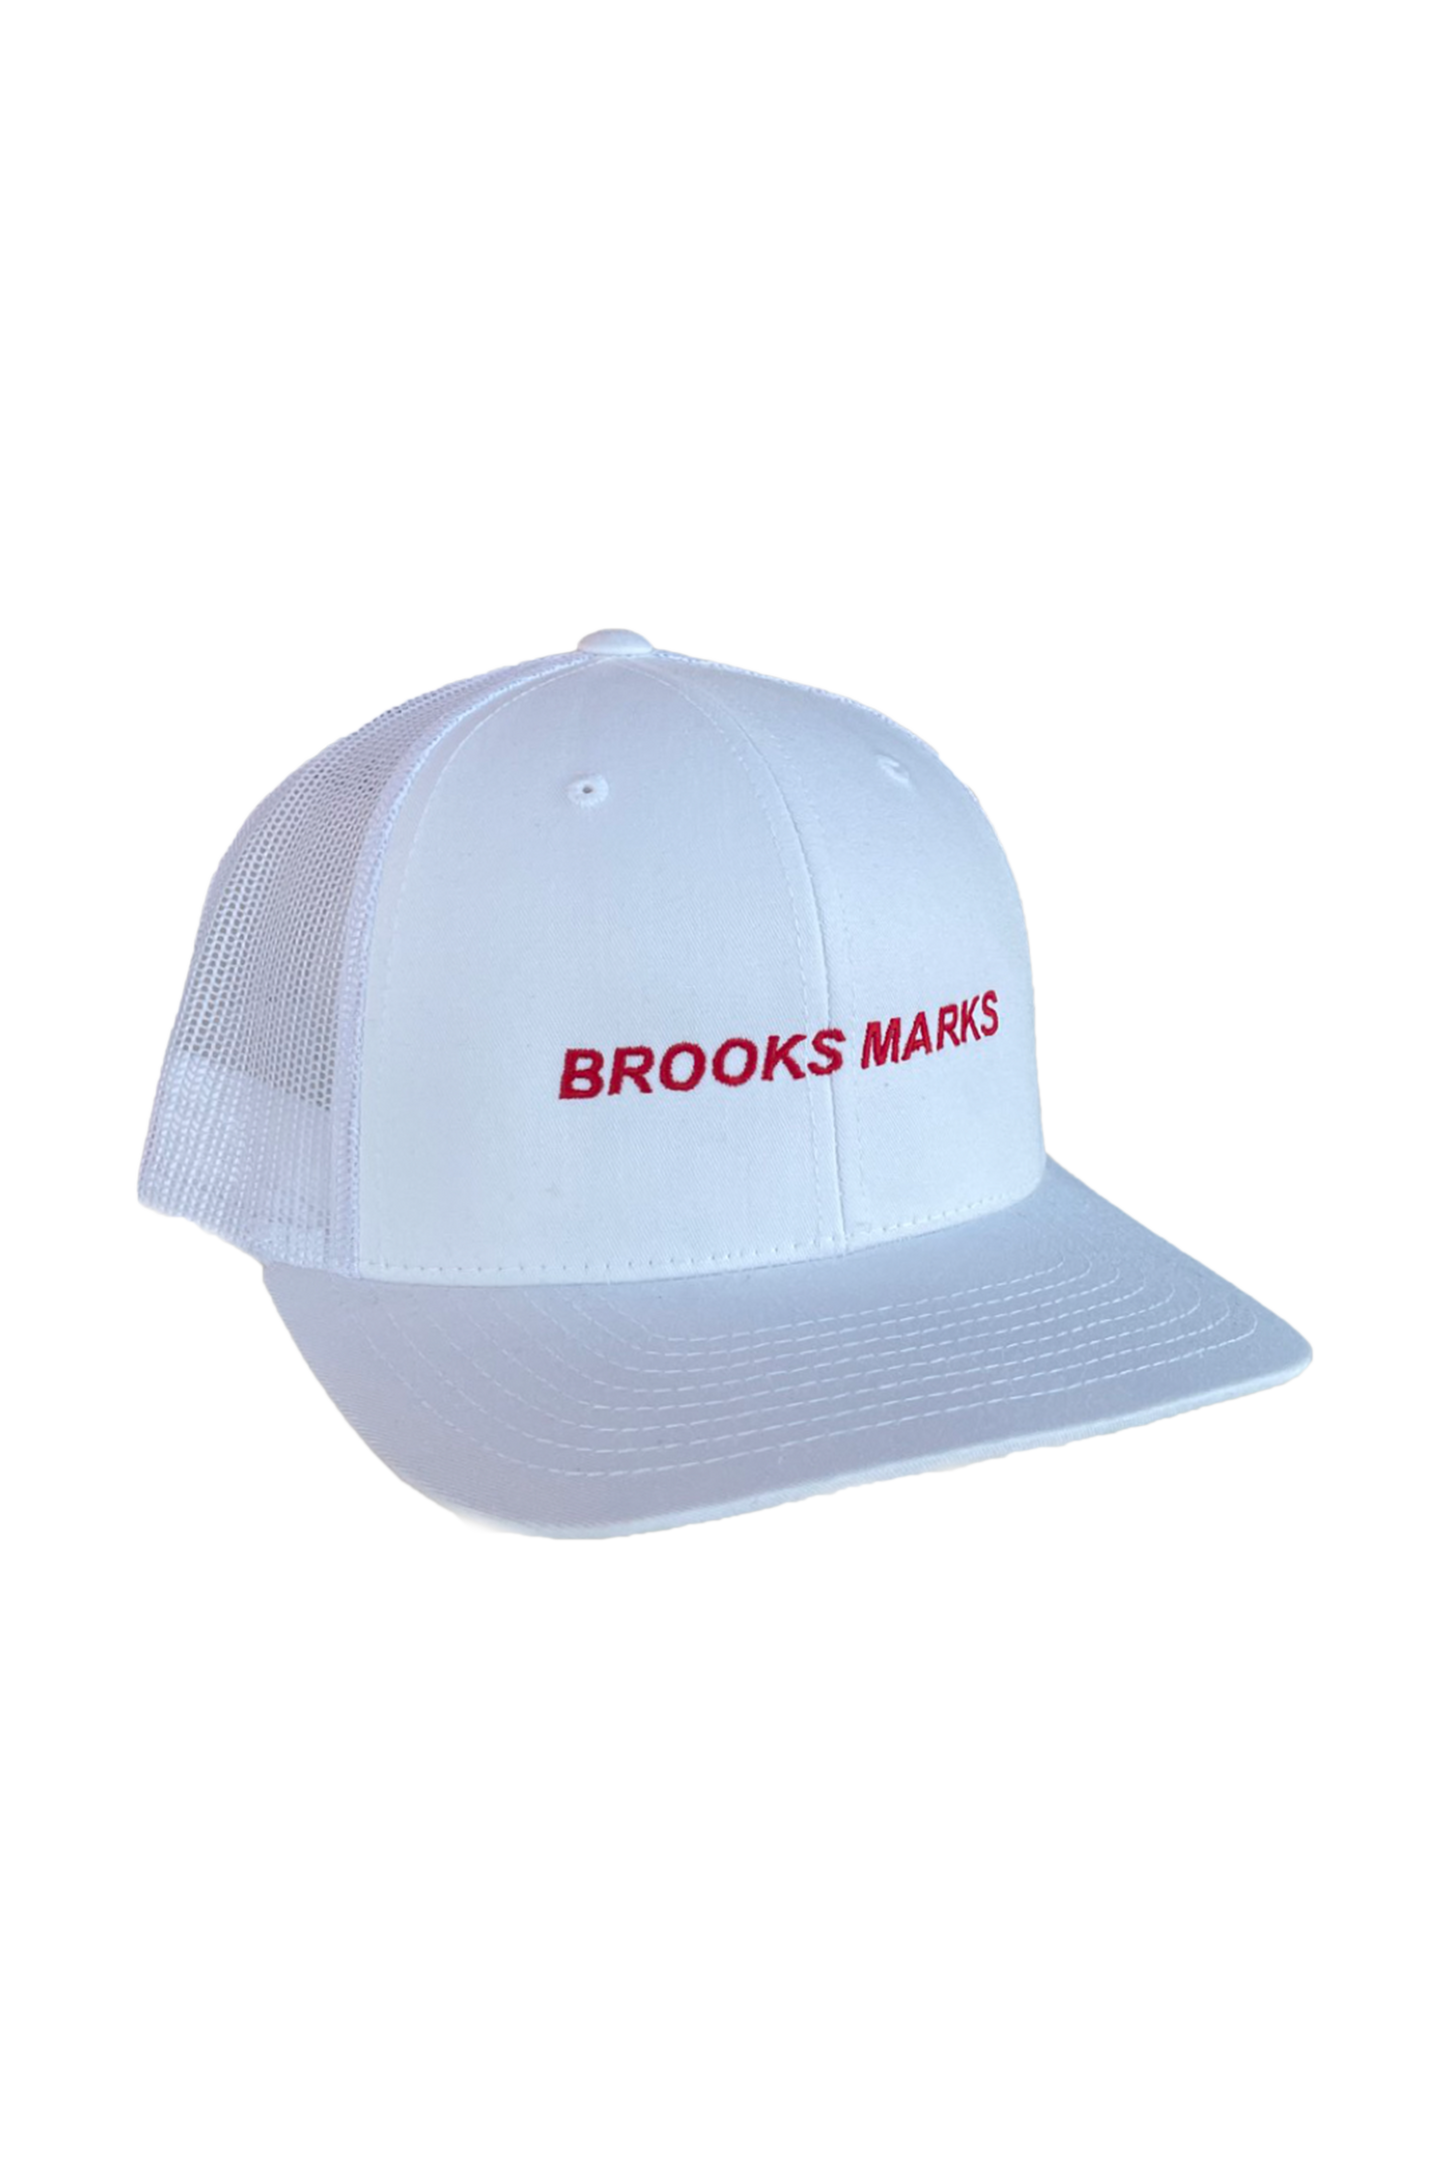 THE SNAPBACK IN CLOUD WHITE